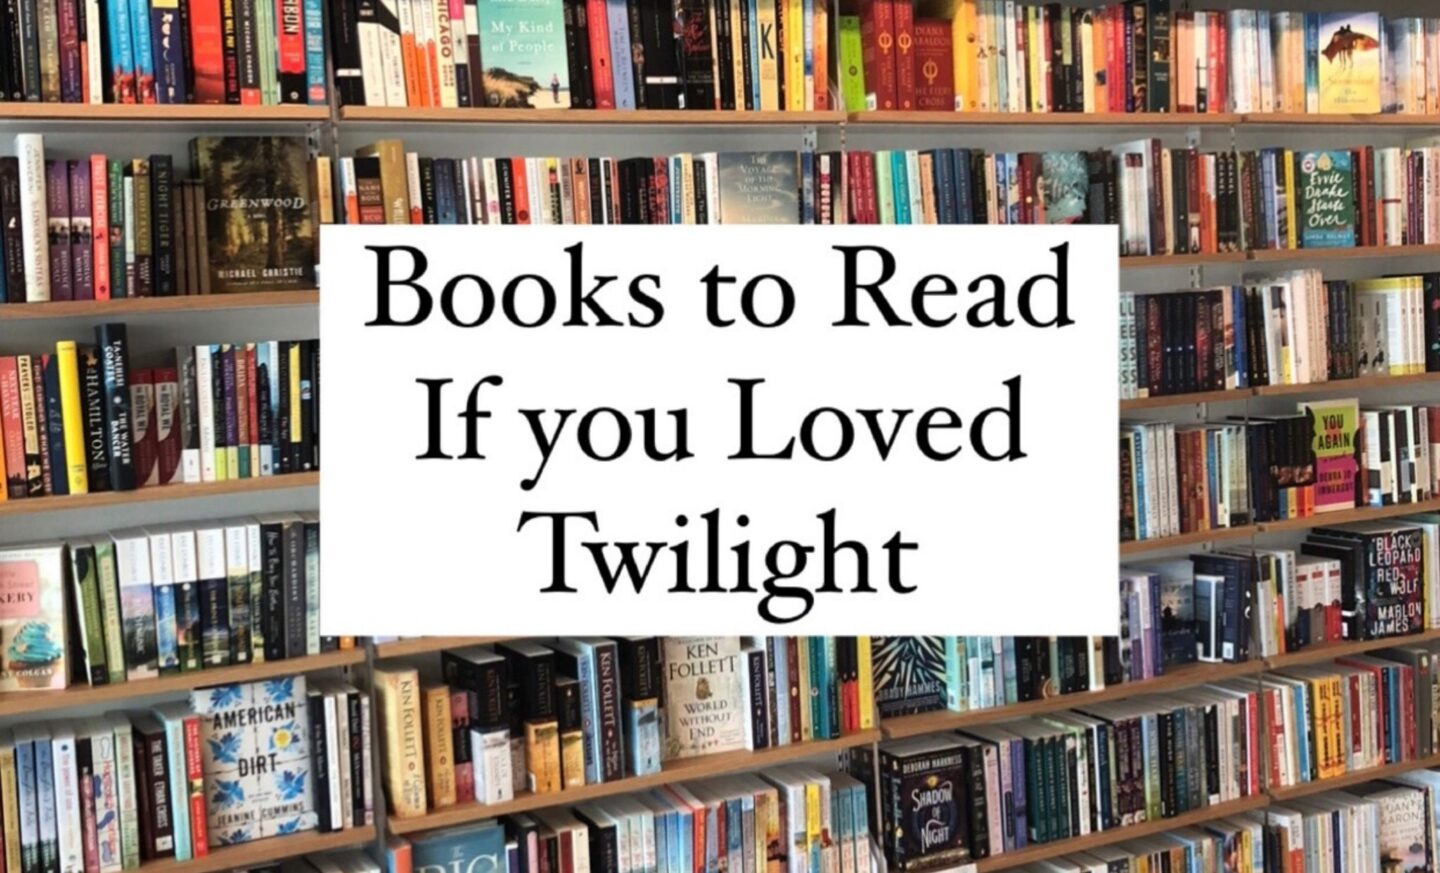 Books to read if you love Twilight - Just like Gilmore Girls